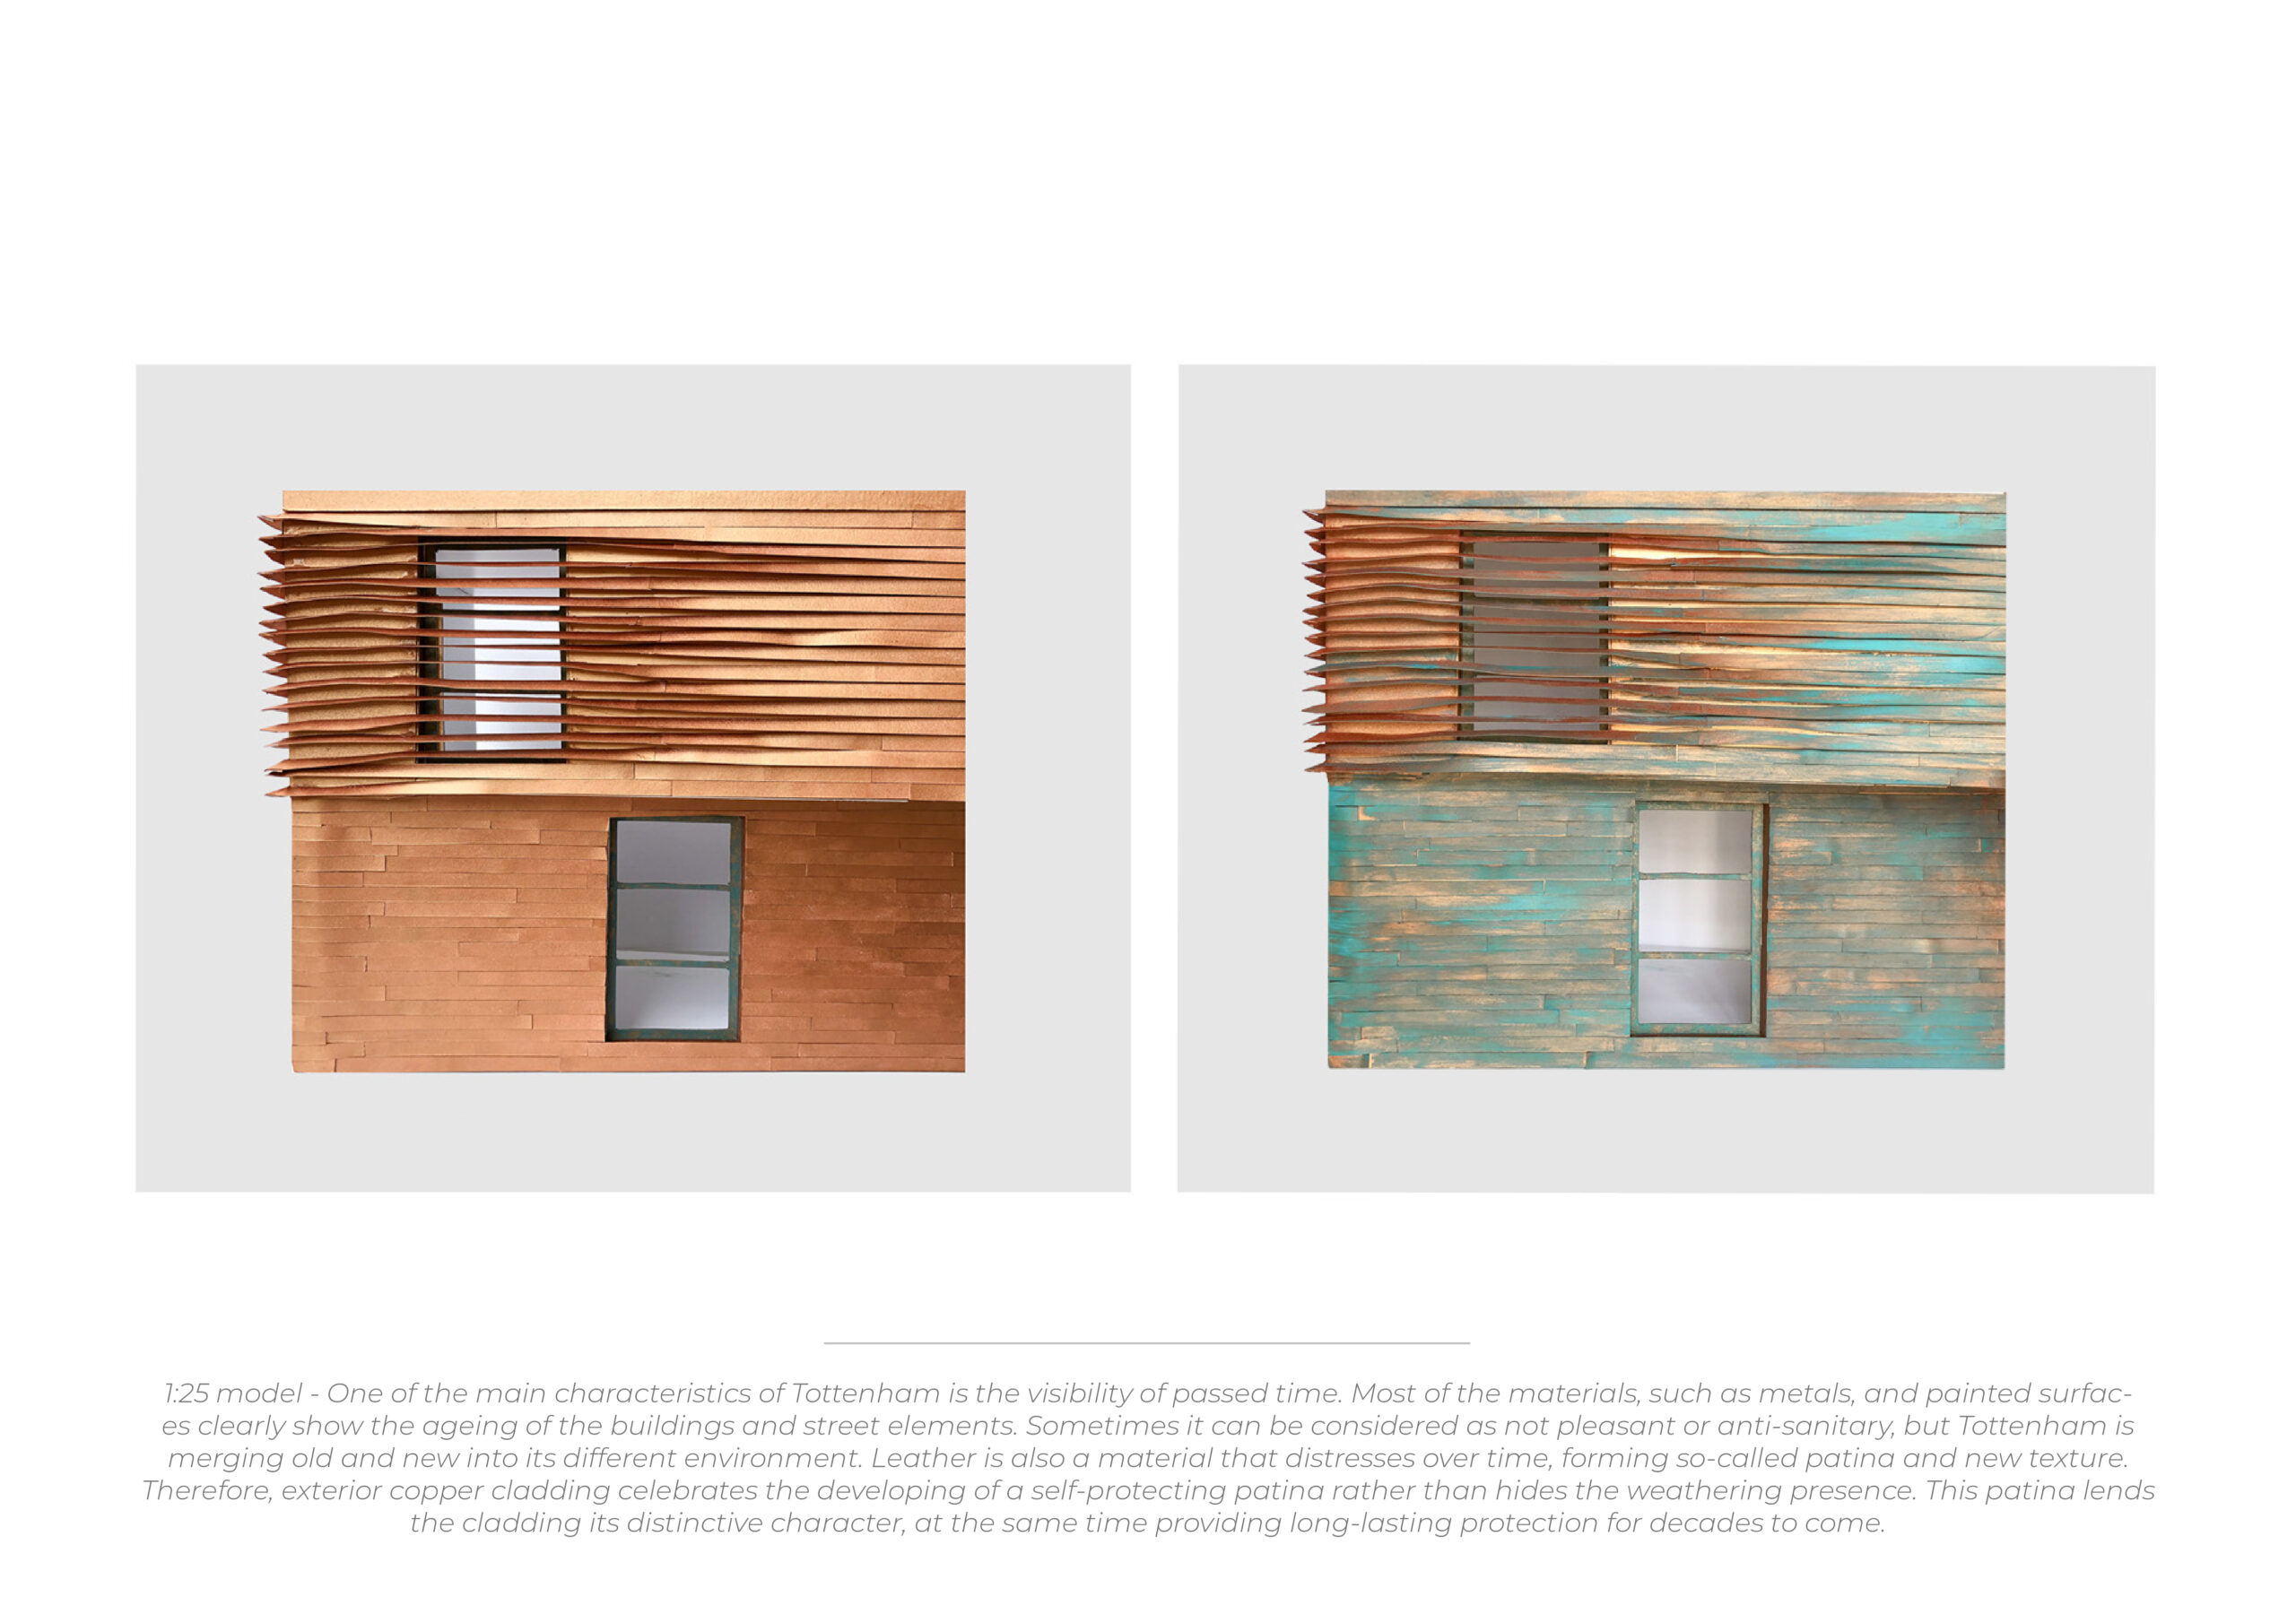 these models how the exterior of the copper building change over time. In one image the copper is brown. In the other it has elements of blue to suggest the ageing copper